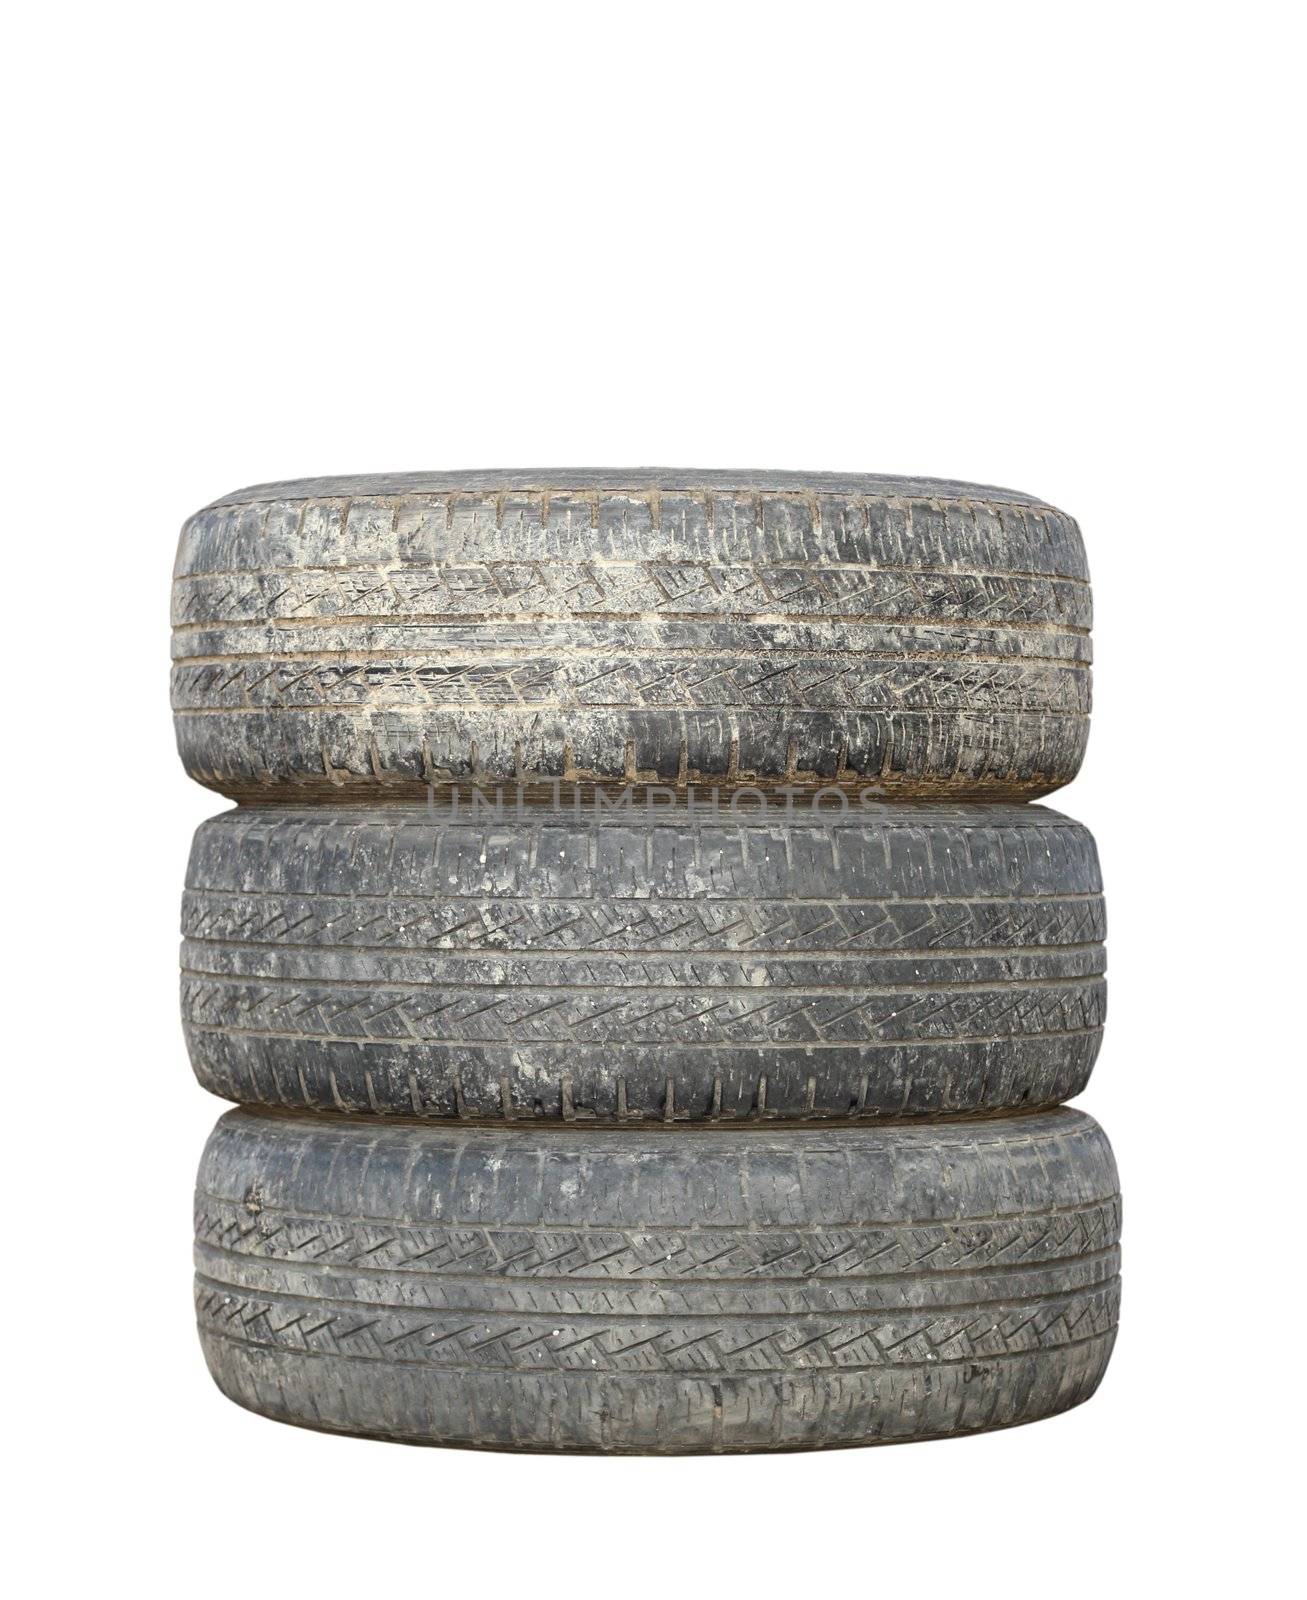 old dirty tires by taviphoto